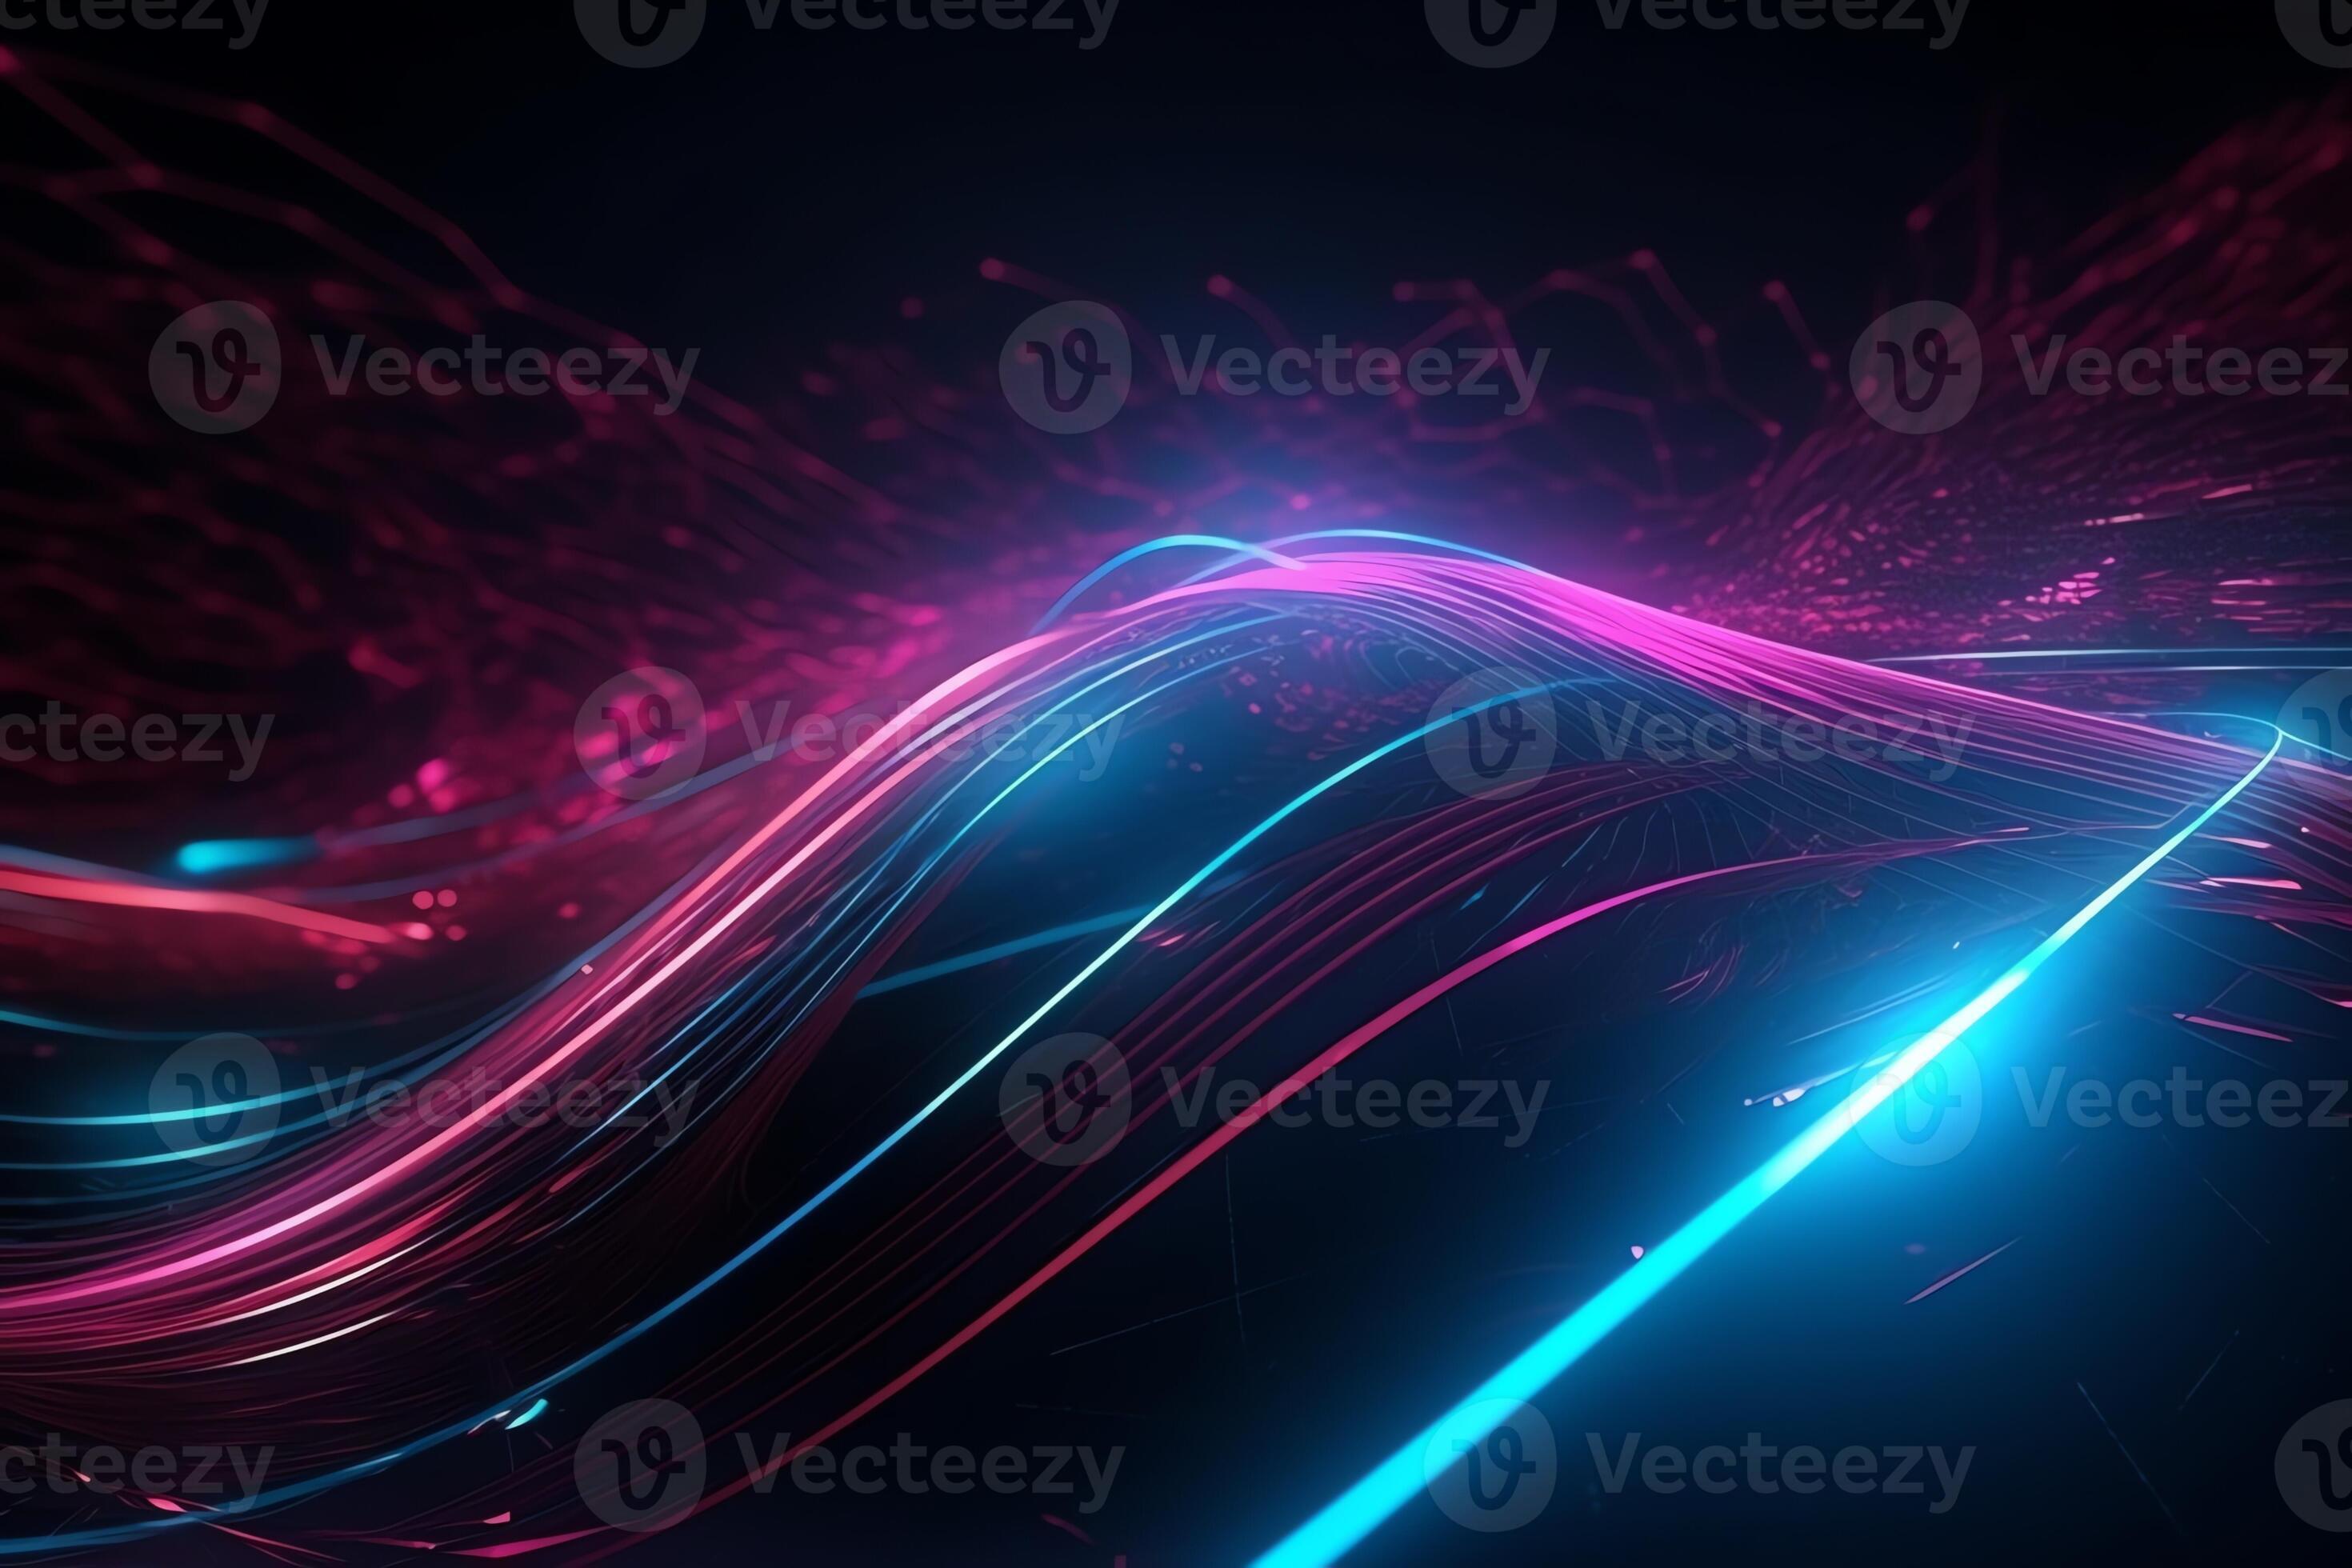 Free Neon Blue And Pink Wallpaper  Download in Illustrator EPS SVG JPG  PNG  Templatenet